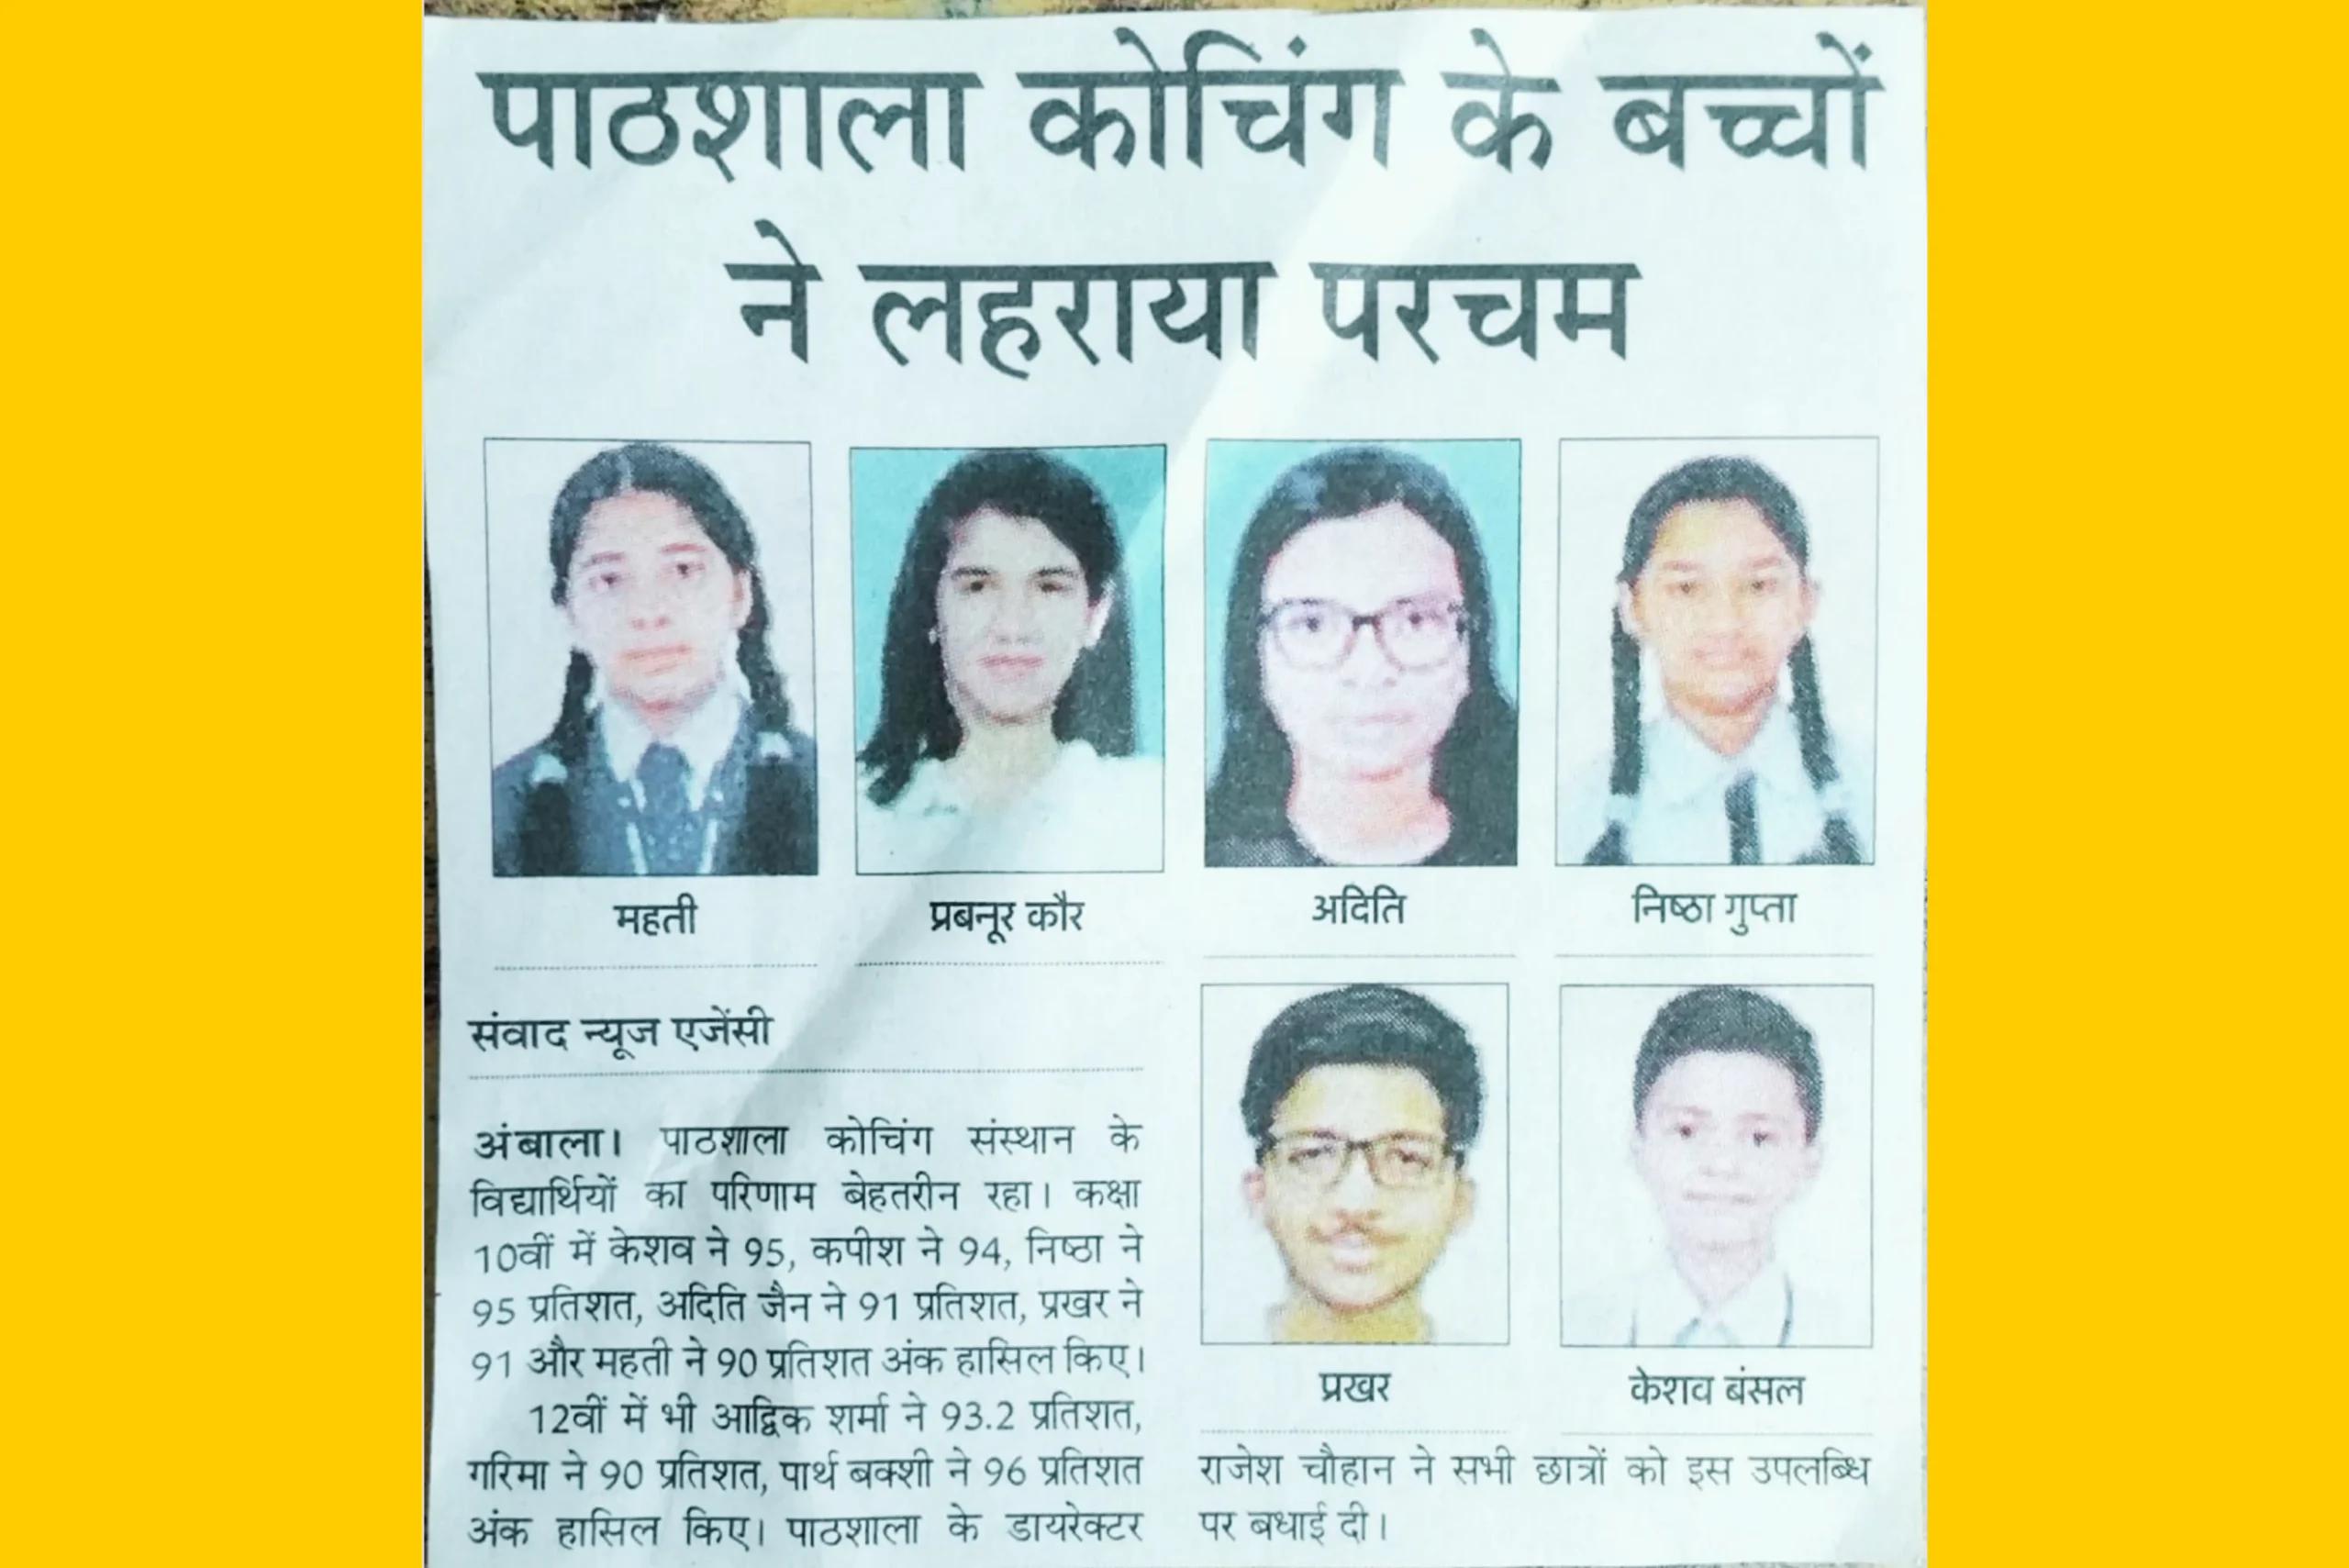 Paathshala Coaching results featured in newspaper 4